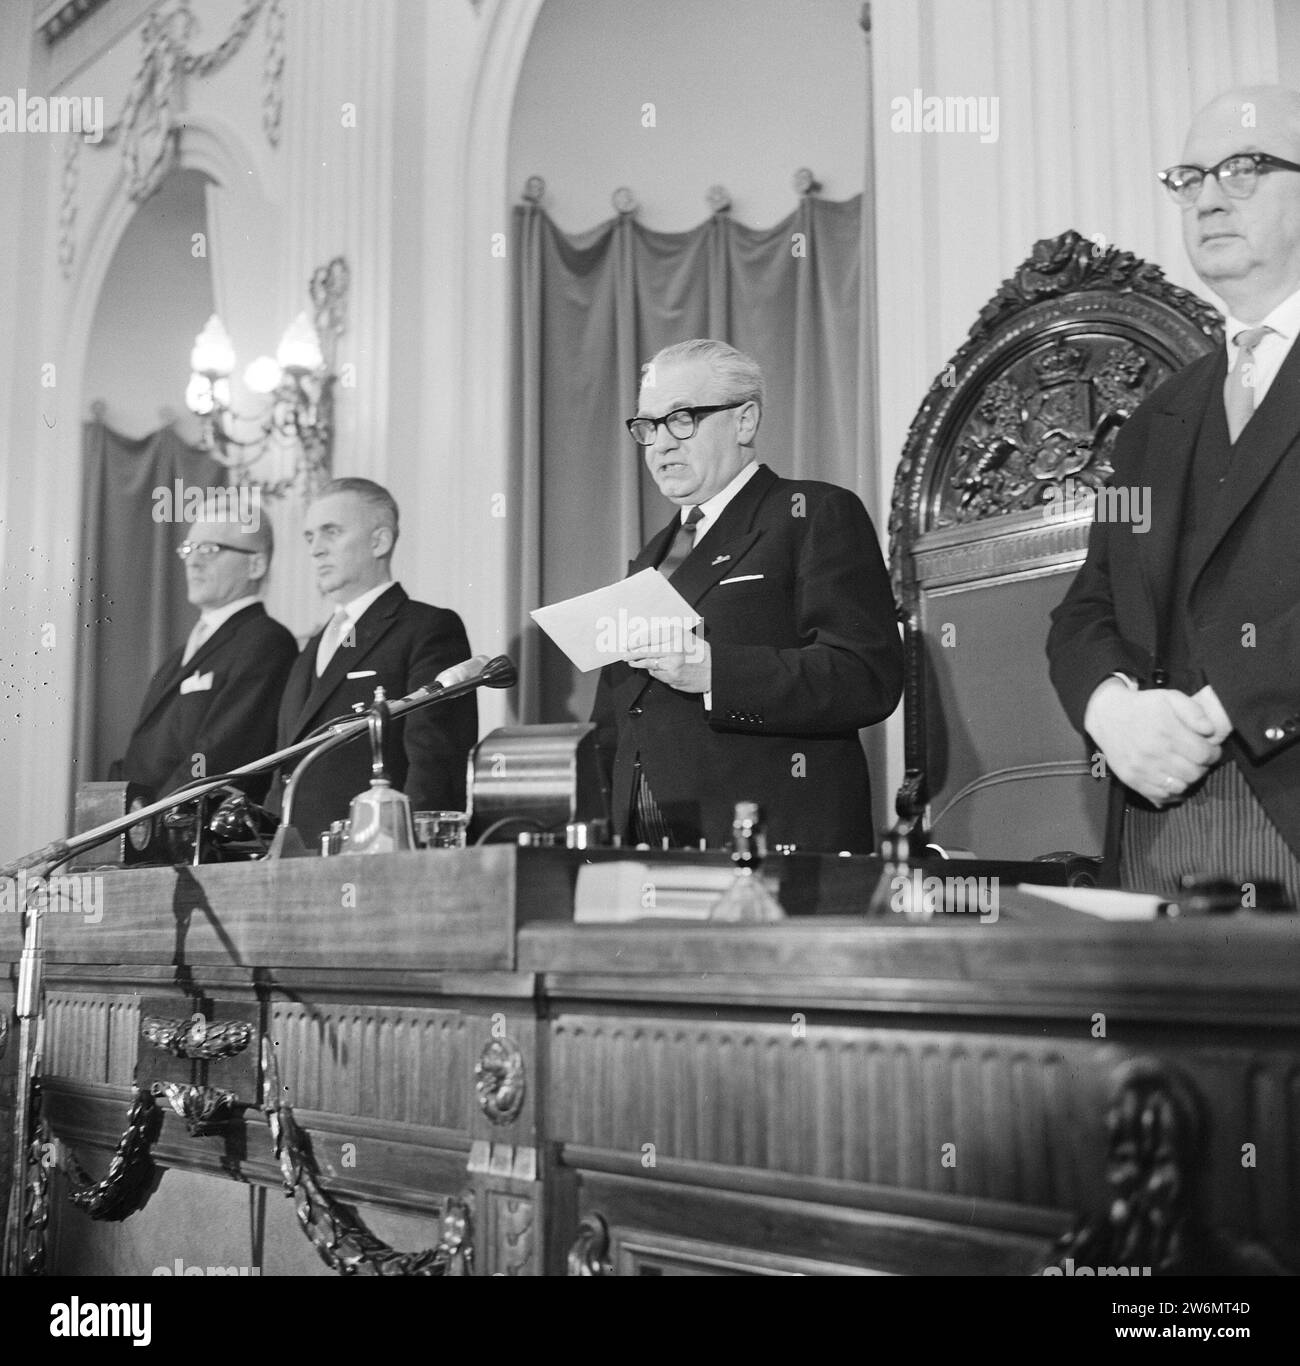 (original caption) Statements made in the Senate and the House of Representatives after the marriage of Princess Irene, Mr. J.A. Jonkman ca. April 29, 1964 Stock Photo